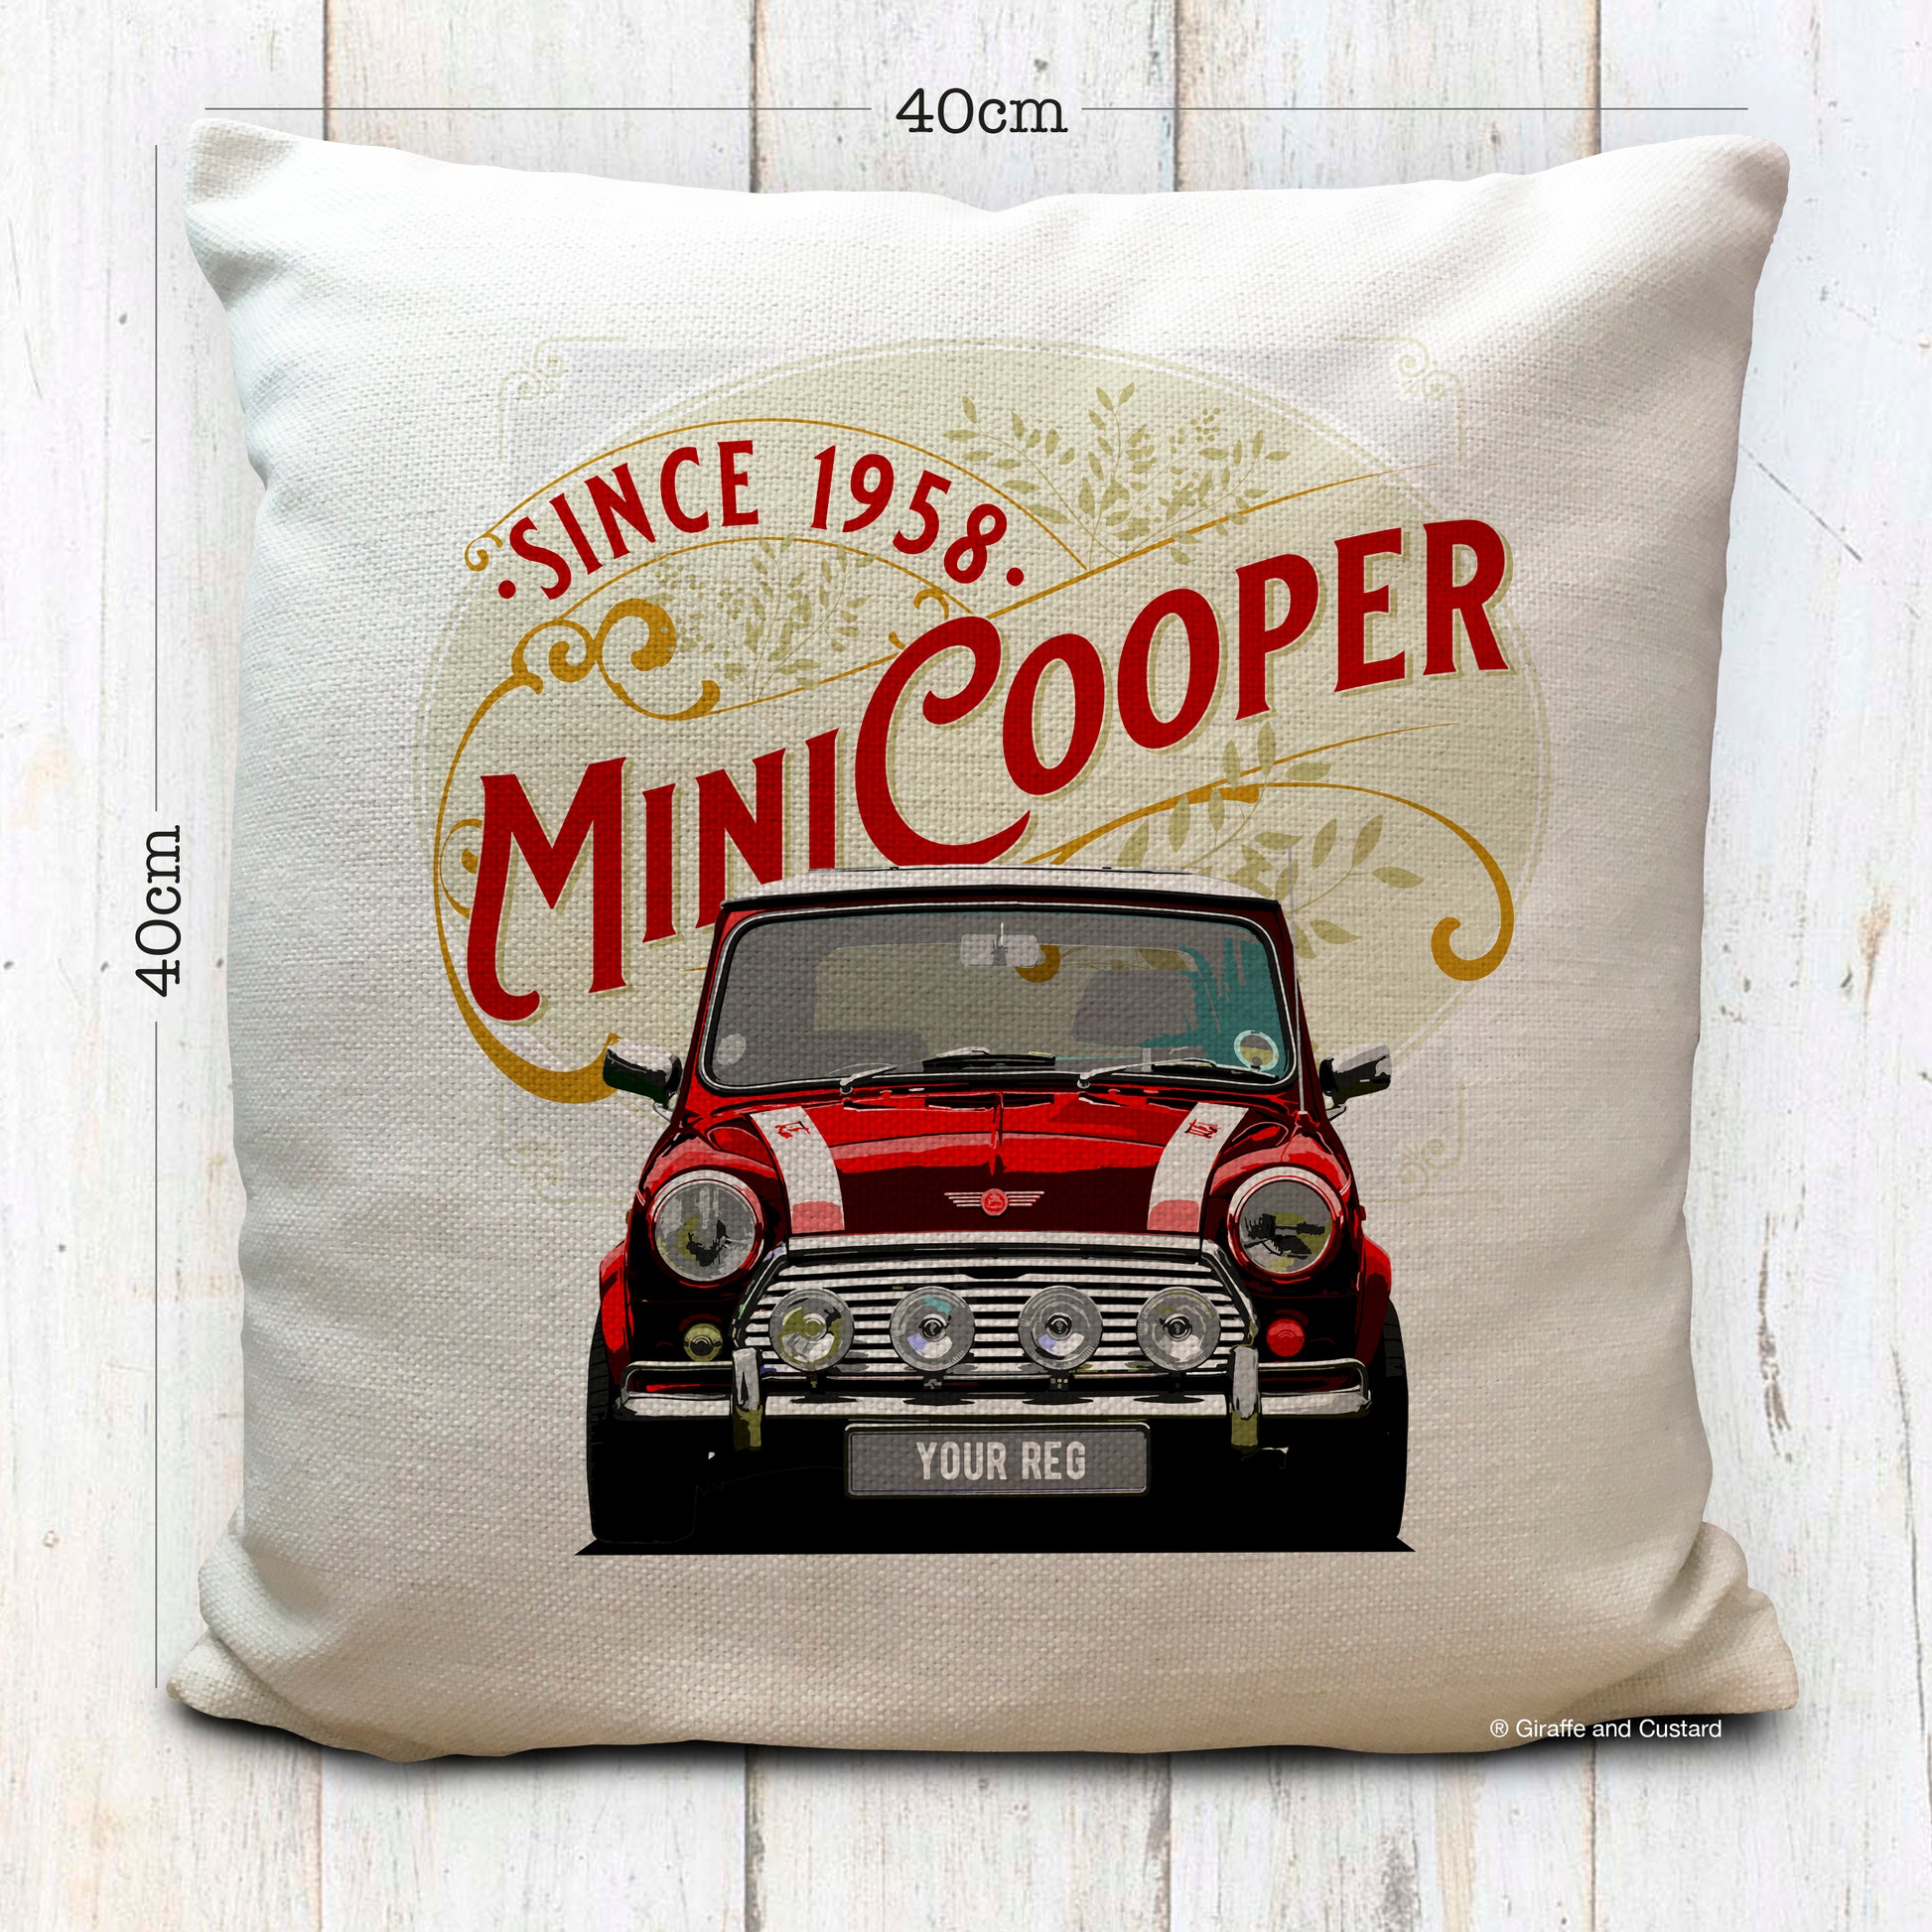 Personalised Mini Cooper 1960s Cushion with Personalised number plate shown in red colour measurements